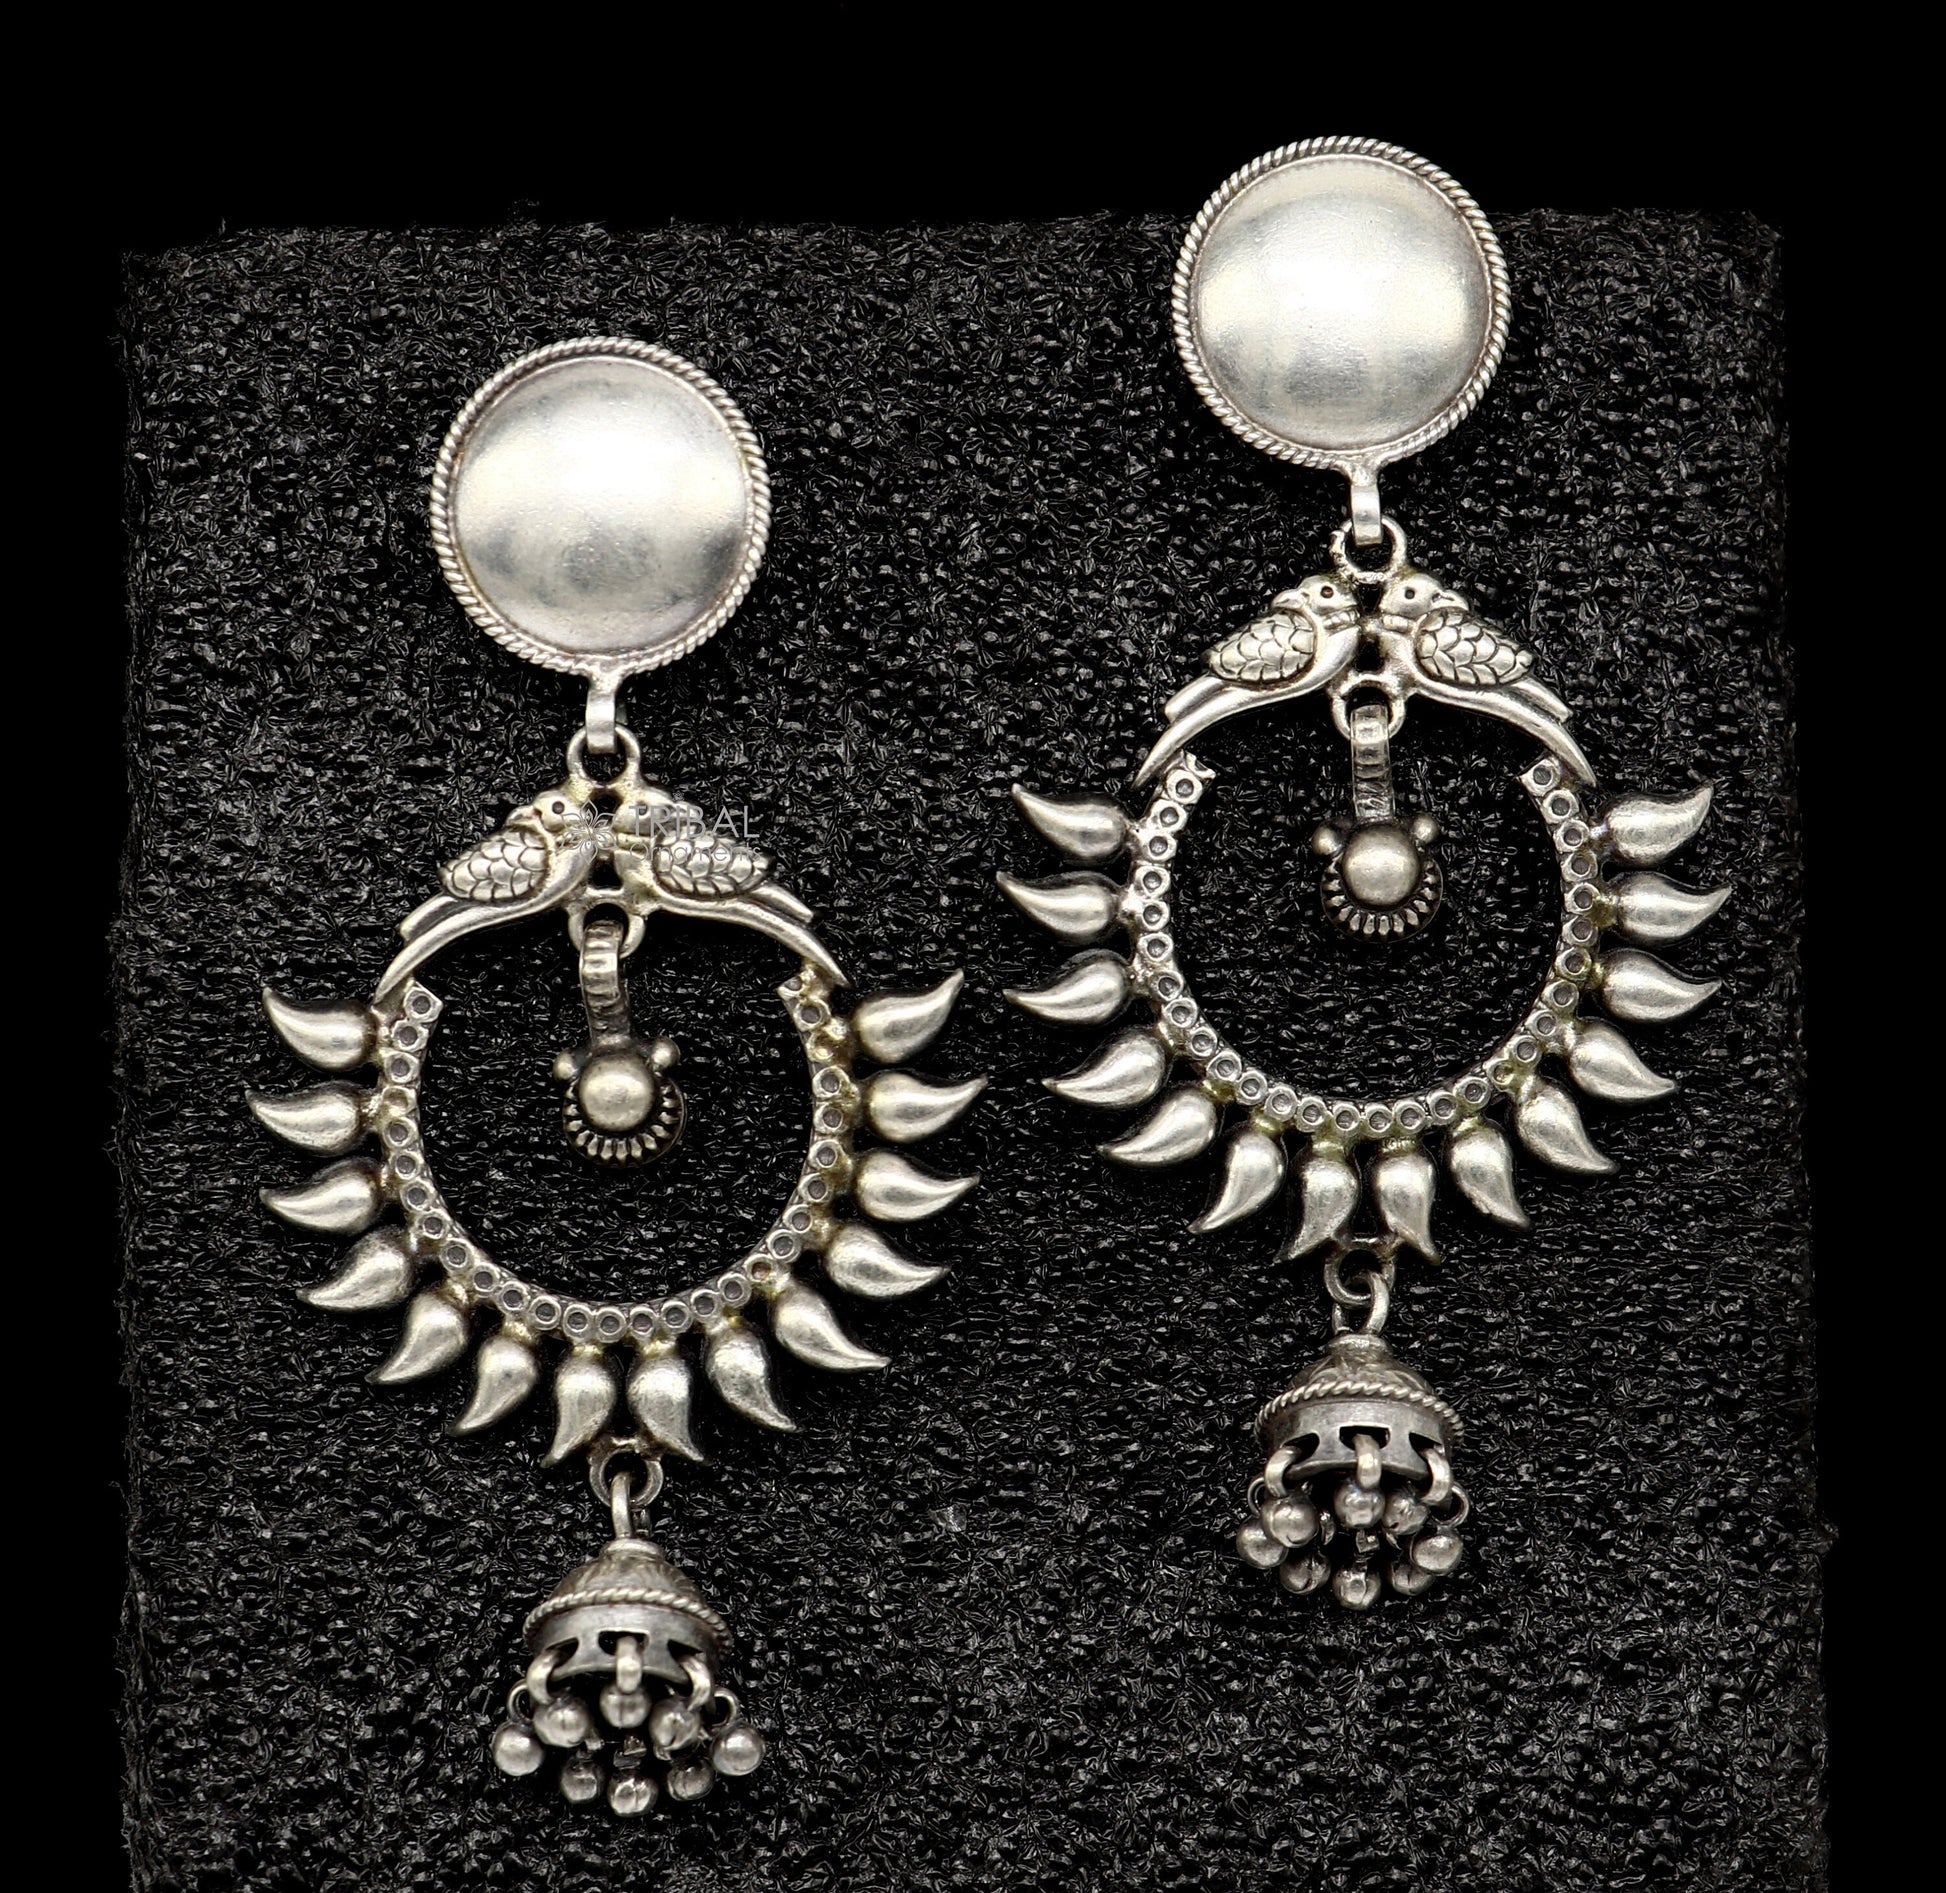 Cultural silver earrings, fashionable and versatile floral silver dangles an intricate ethnic pattern made by 925 sterling silver s1231 - TRIBAL ORNAMENTS